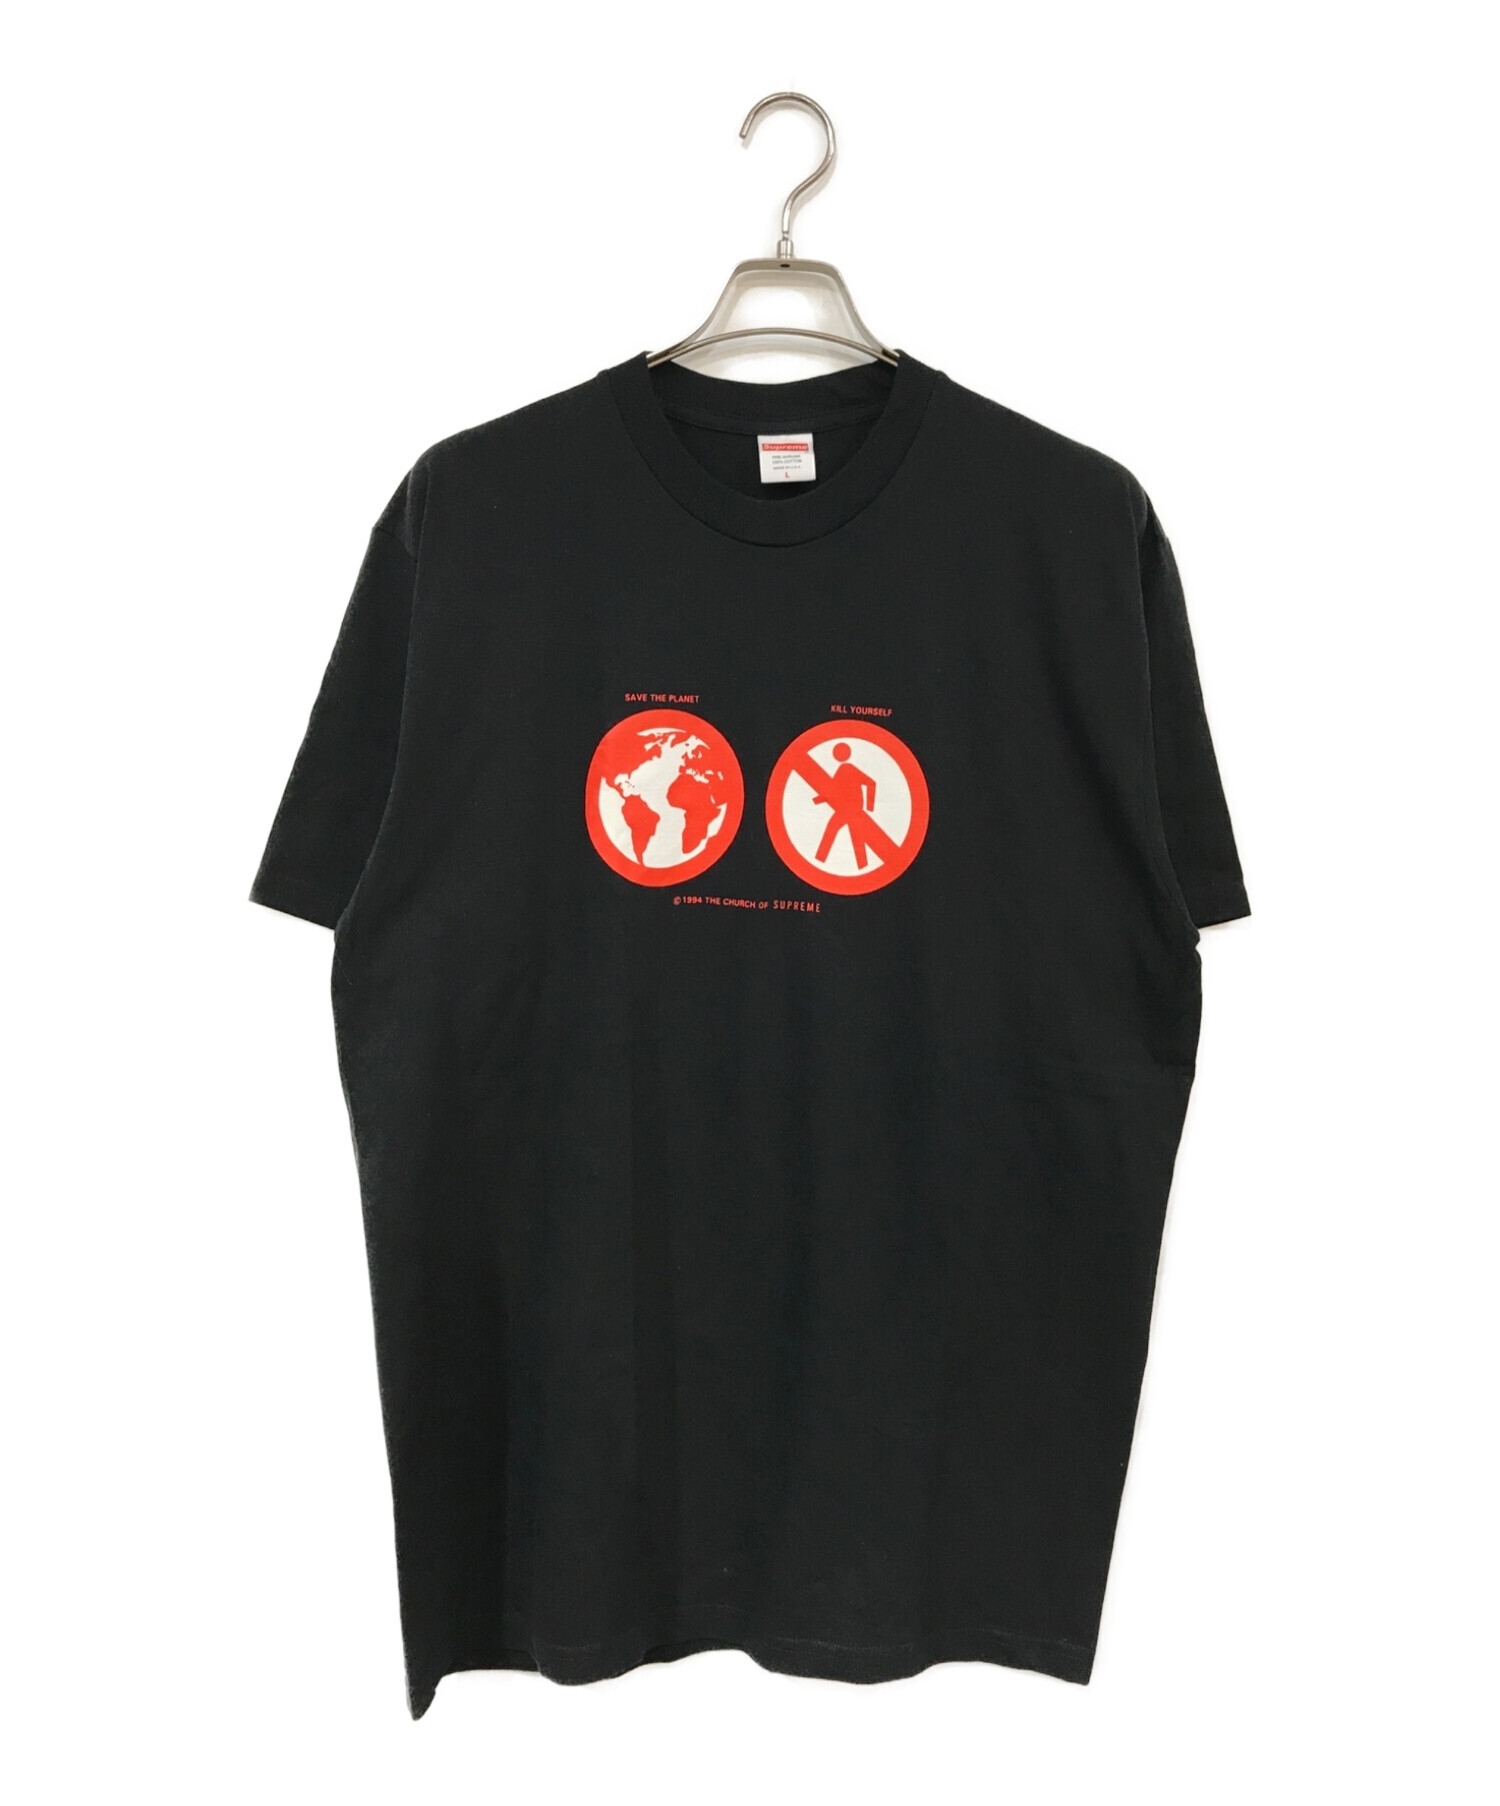 Supオマケ付き！Supreme  Save The Planet Tシャツ S